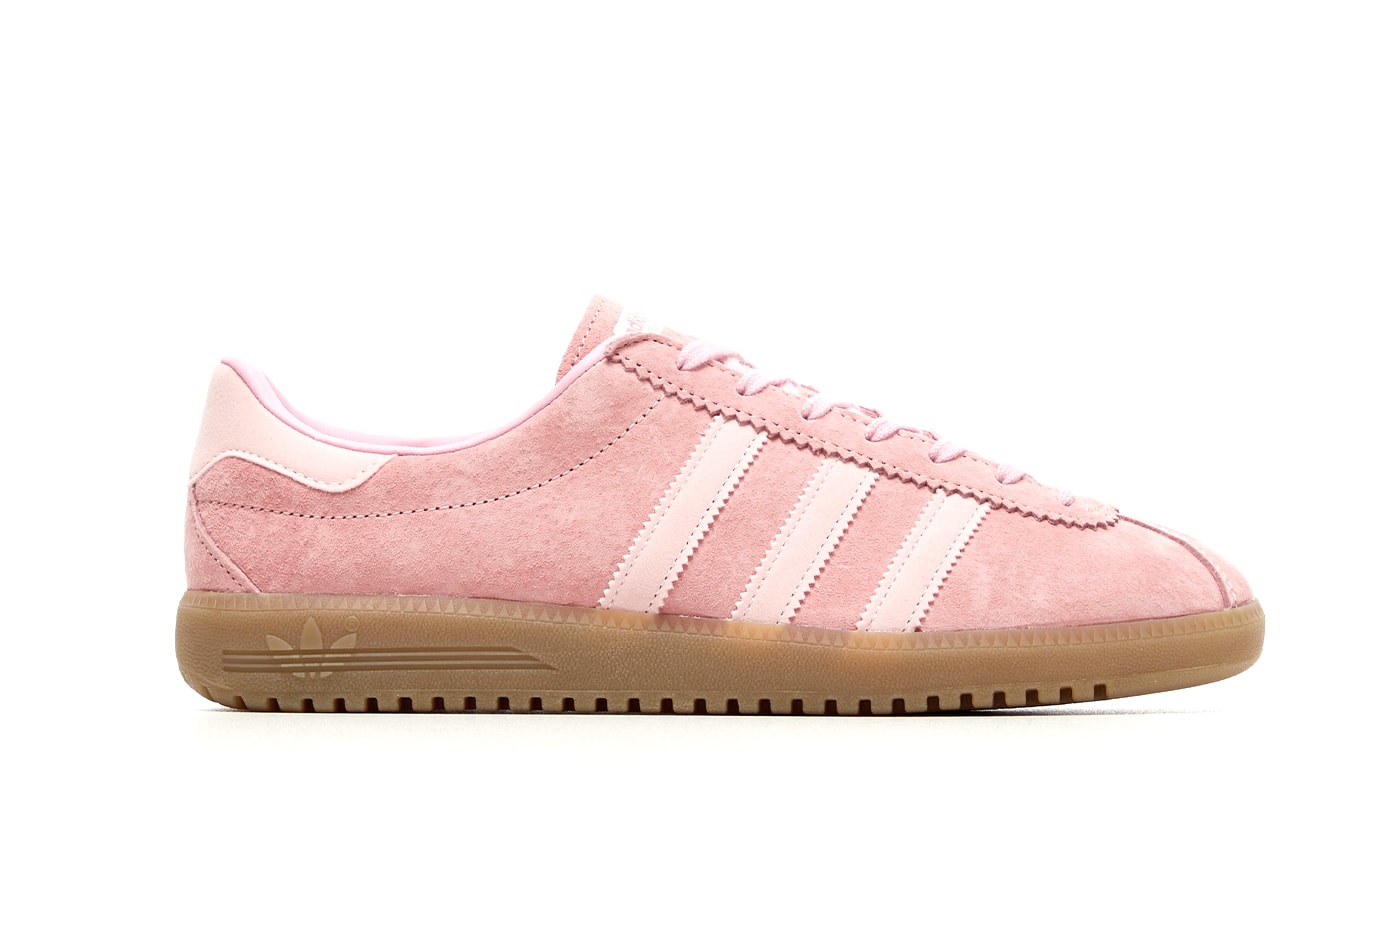 adidas Originals Bermuda Pastel Color Release Info GY7386 GY7387 GY7388 Date Buy Price 